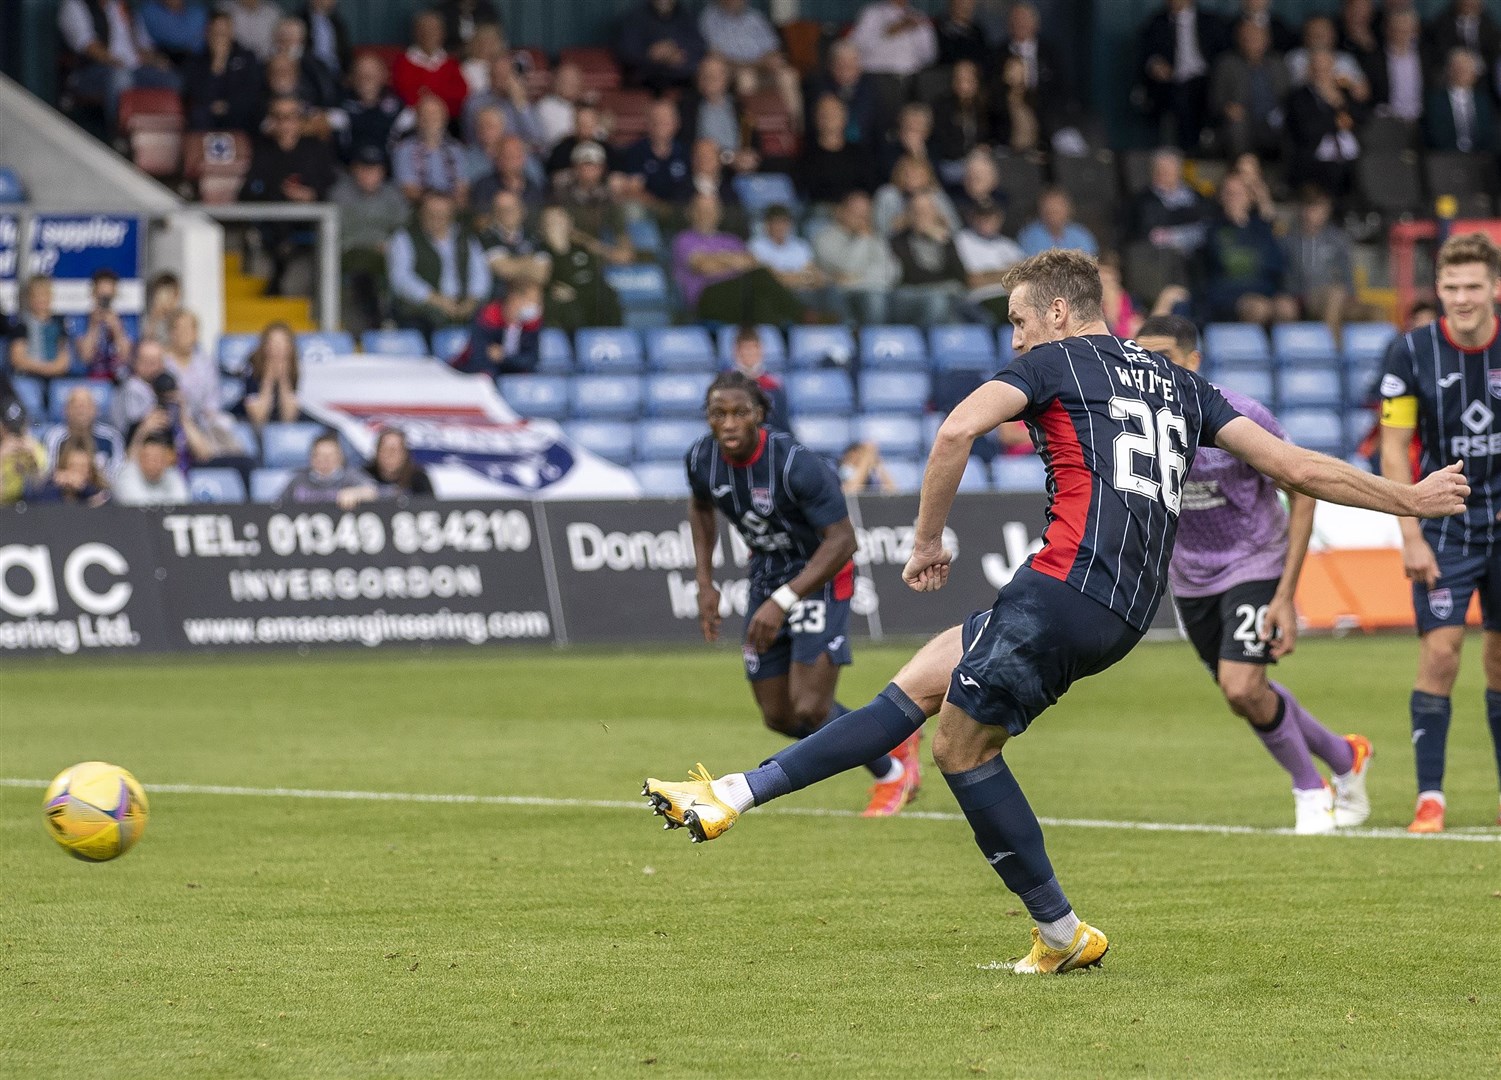 Picture - Ken Macpherson, Inverness. Ross County(2) v Rangers(4). 22.08.21. Ross County's Jordan White scores from the penalty-spot.